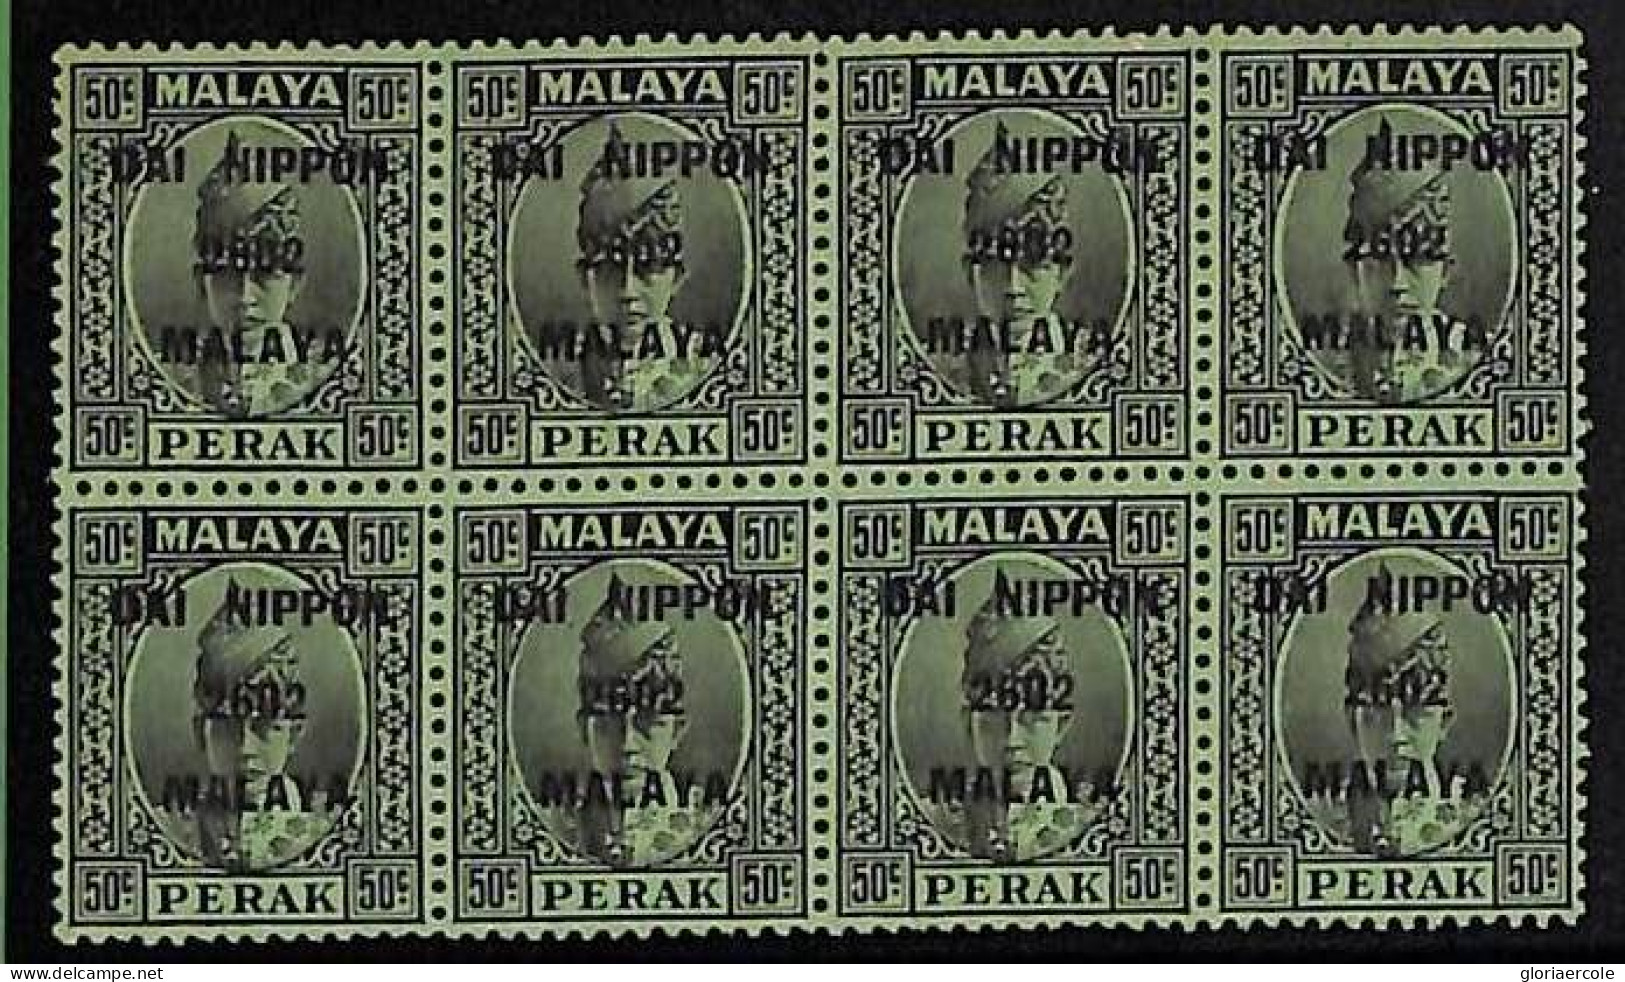 ZA0047a1 - MALAYA Japanese Occupation -  STAMP -   SG # 251 Block Of 8  Mint MNH - Occupazione Giapponese